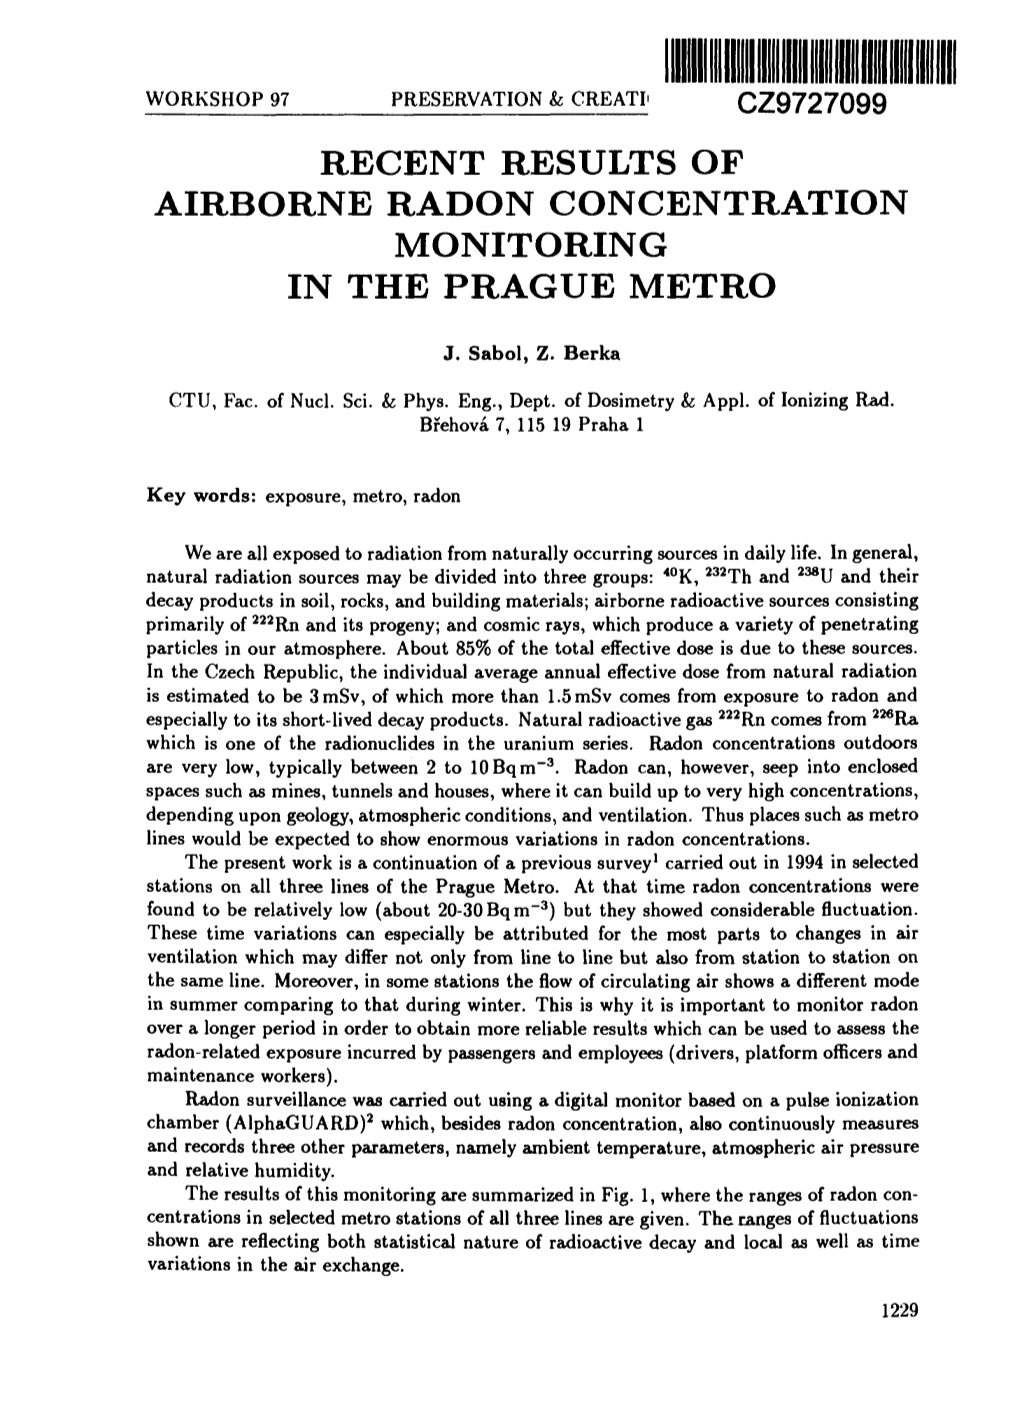 Recent Results of Airborne Radon Concentration Monitoring in the Prague Metro